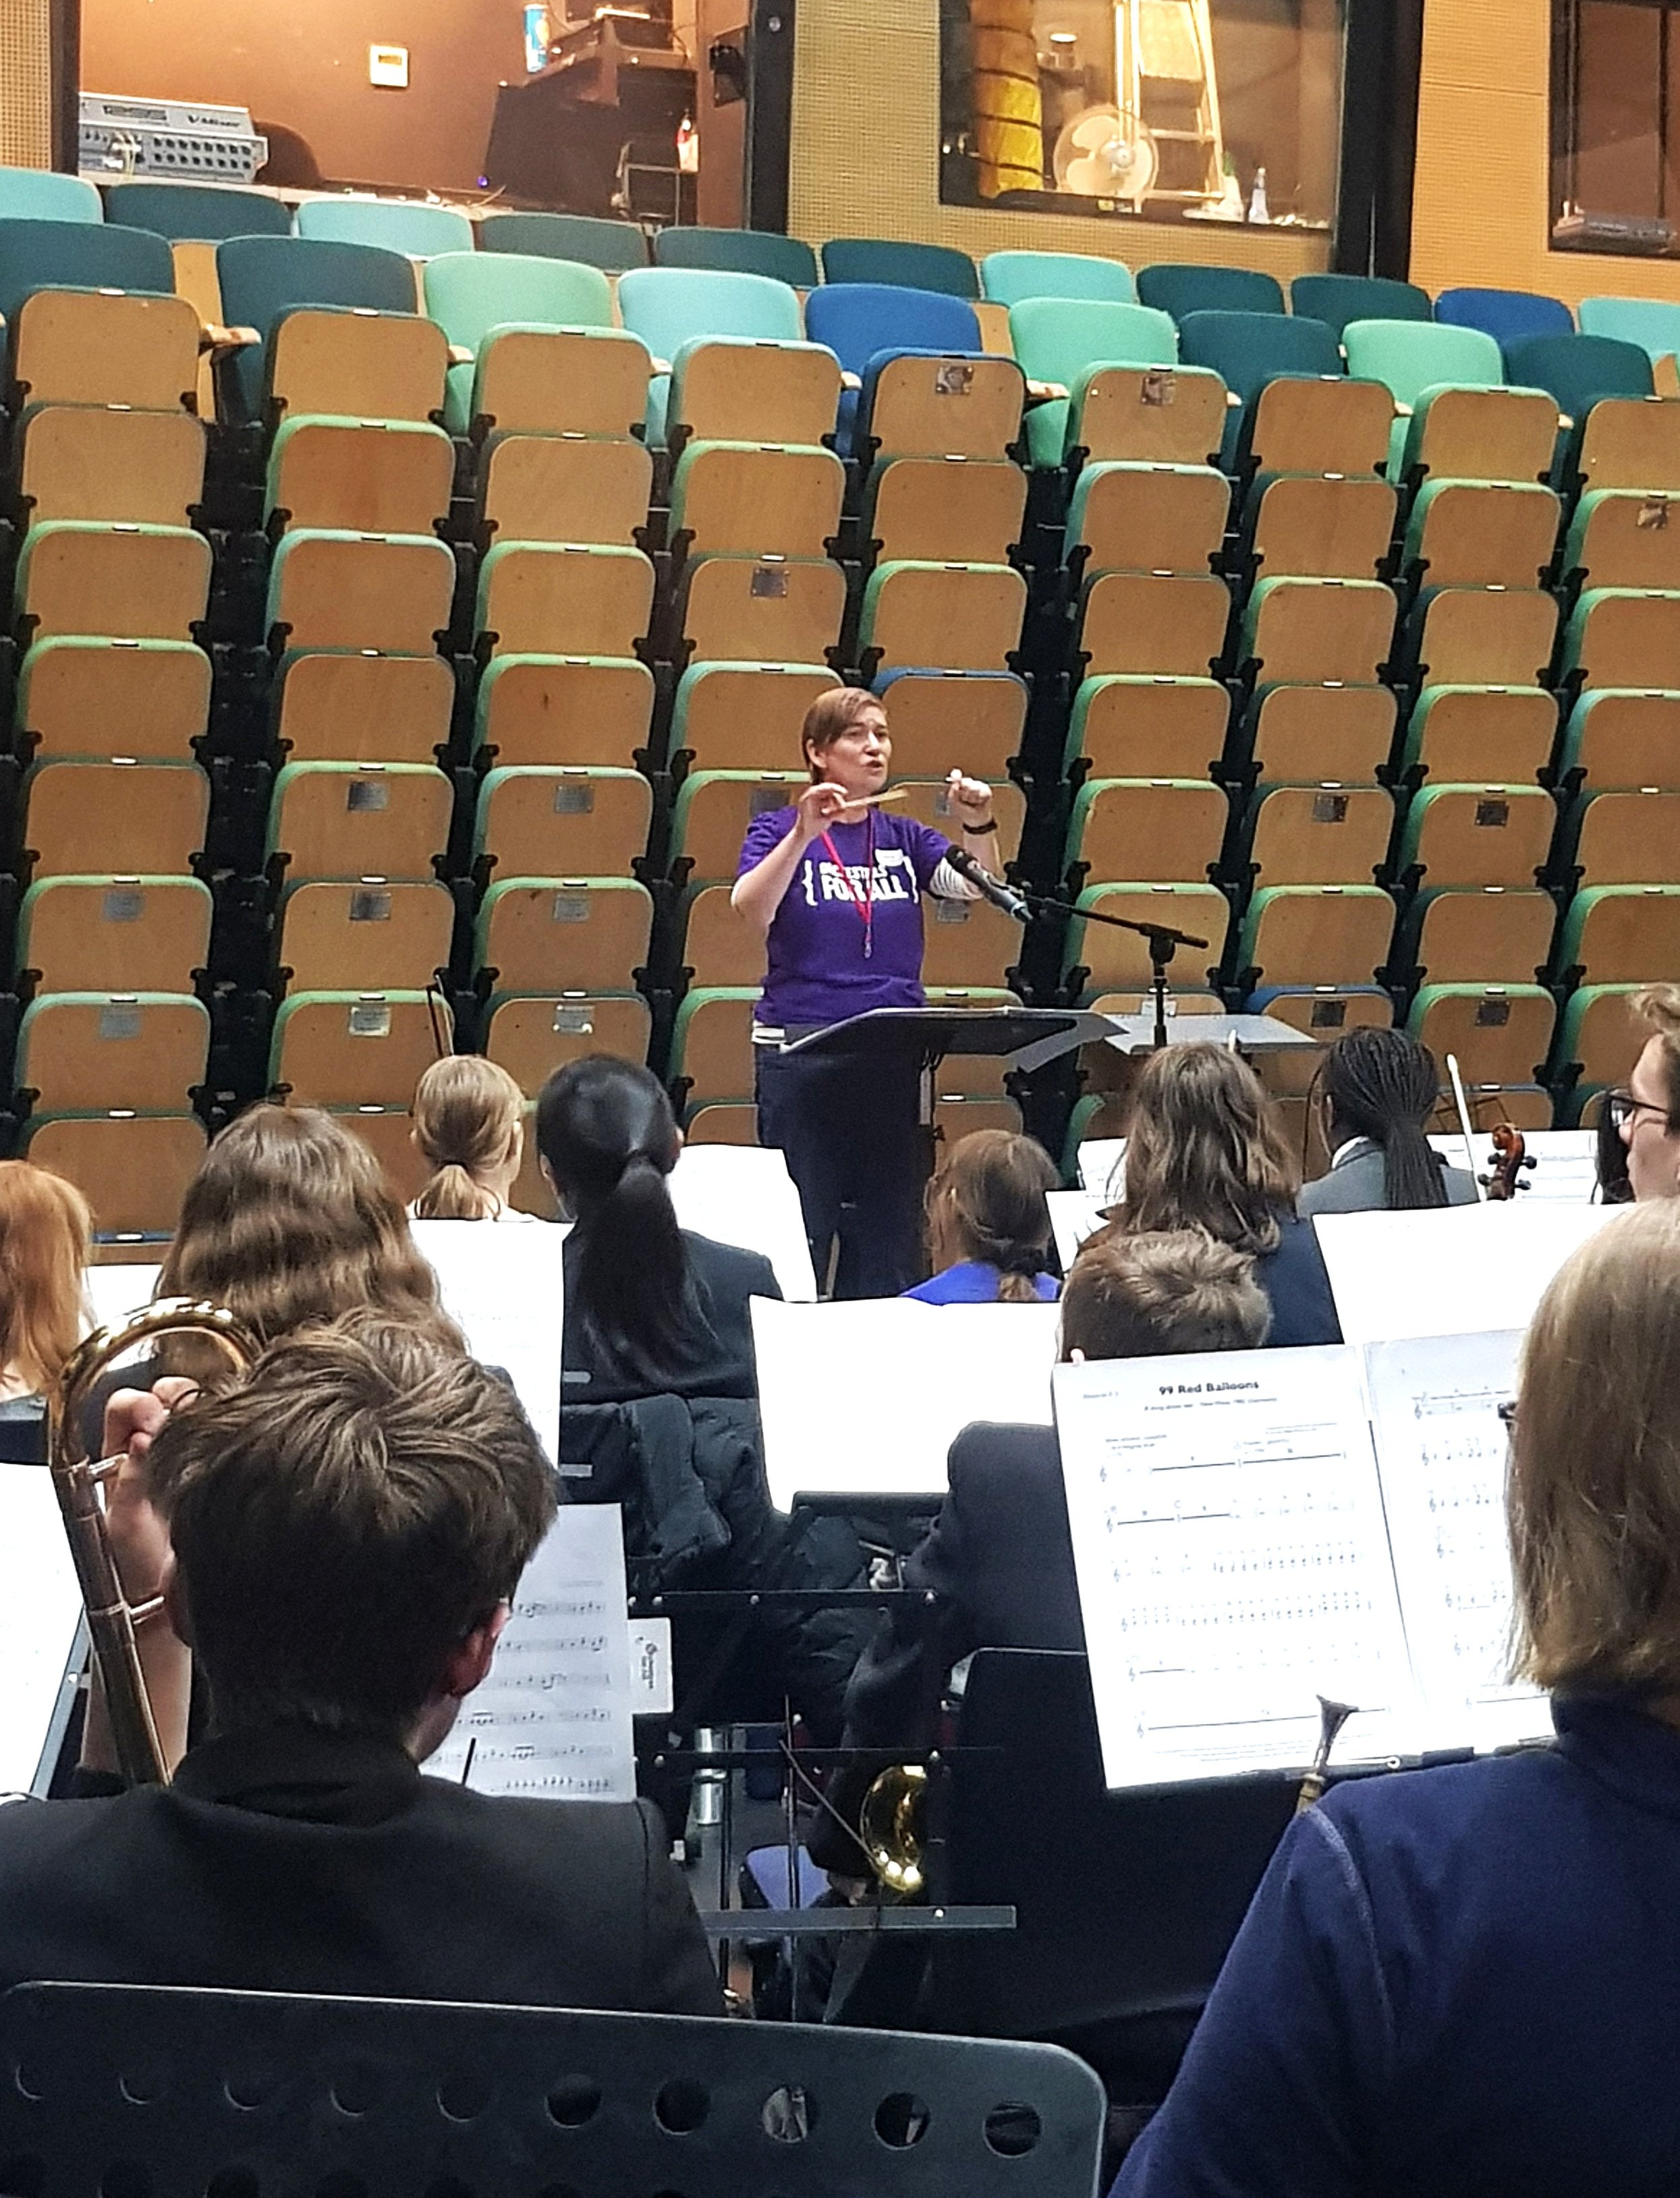 Our brilliant conductor for the day, Emma!